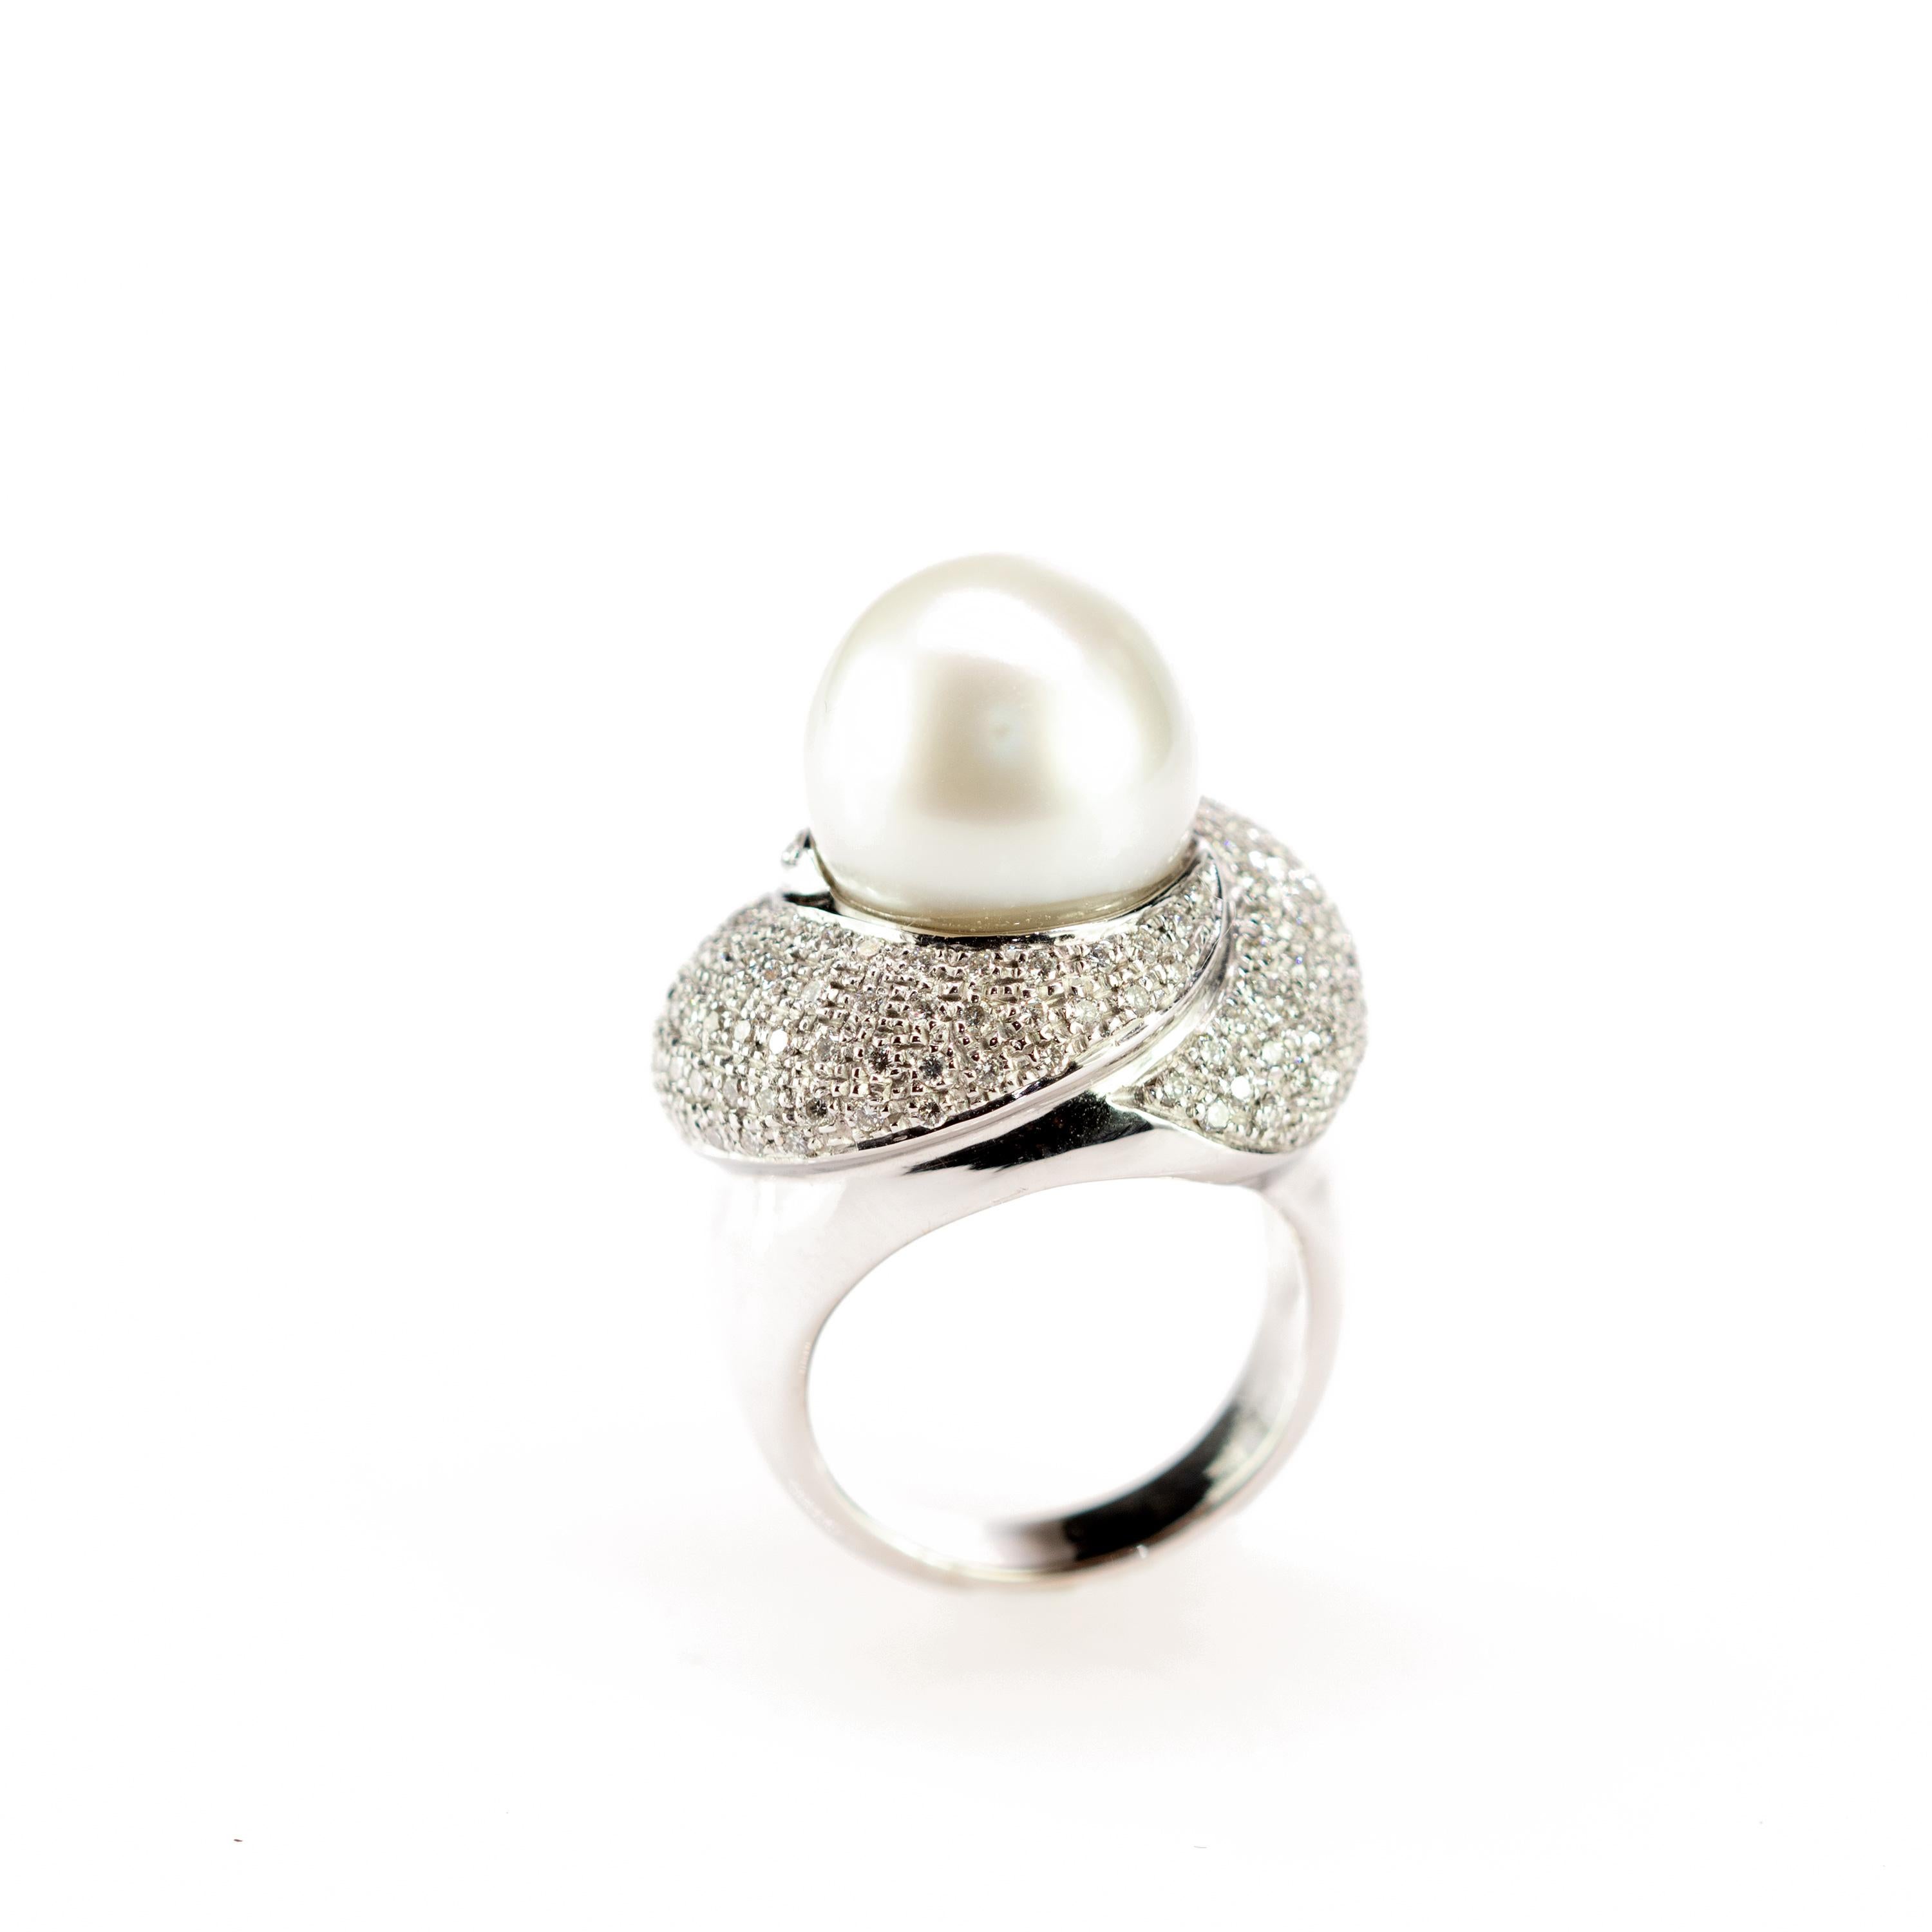 Timeless design in white gold stunned with diamonds and Japanese natural pearl. This design is inspired by the mermaid legends where there is a unique creature as beautiful as this pearl that is always protected with gold woven. This design shows